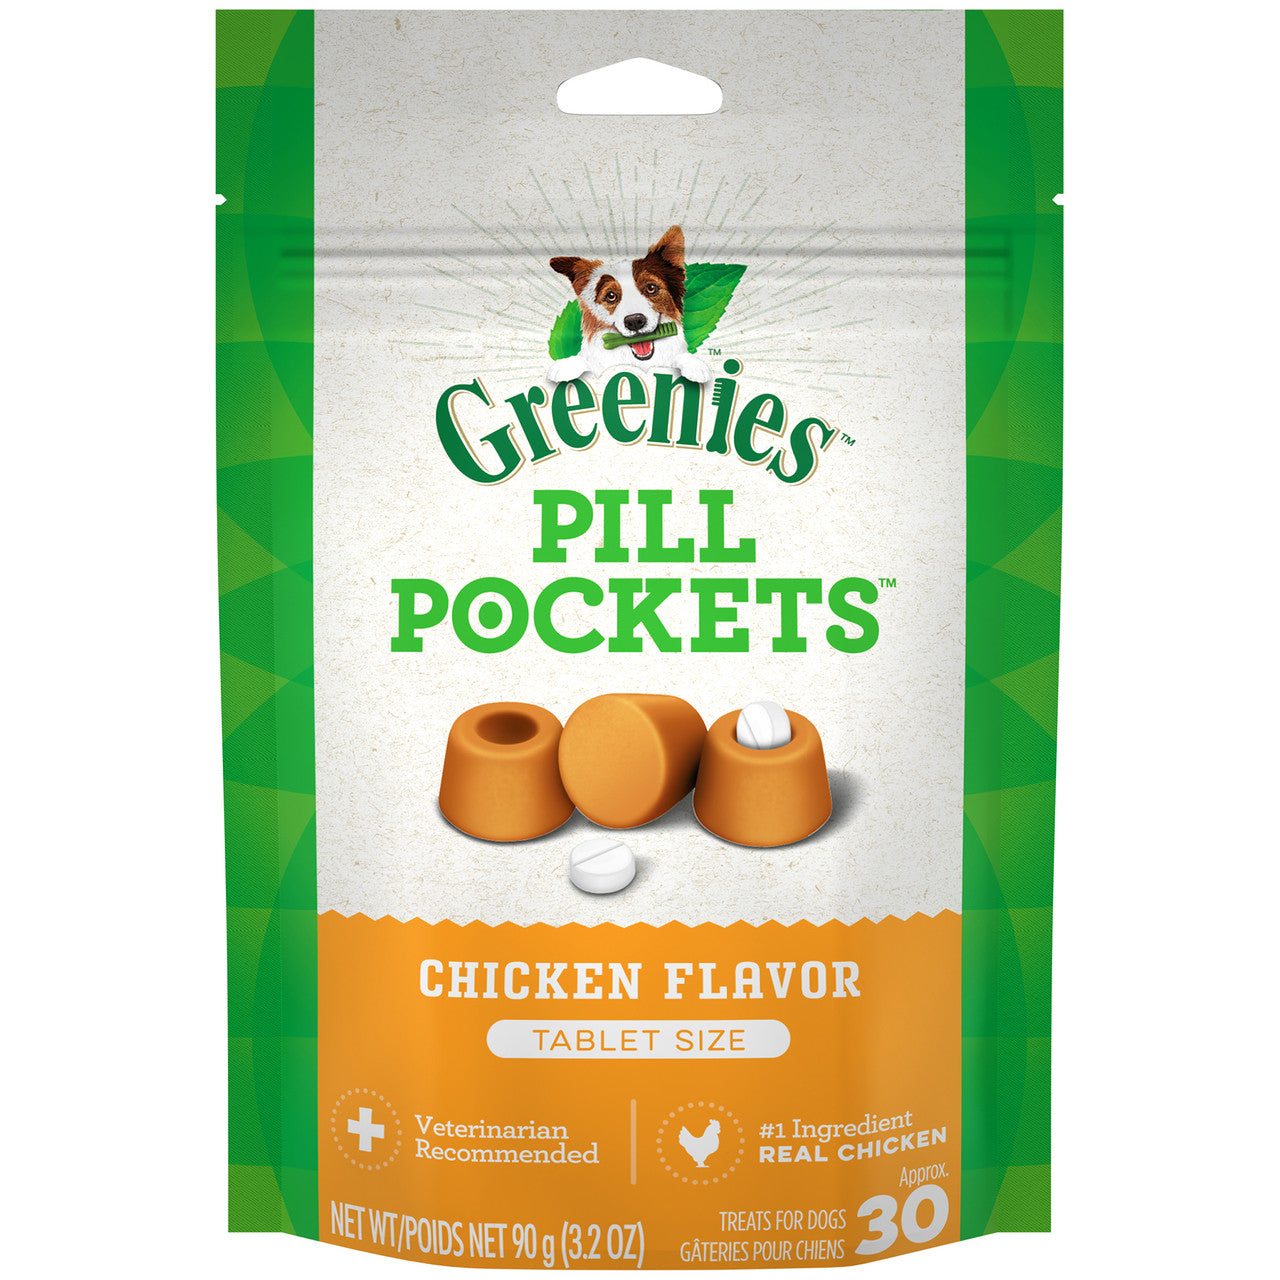 Greenies Pill Pockets for Tablets Chicken 30 Count 3.2 oz